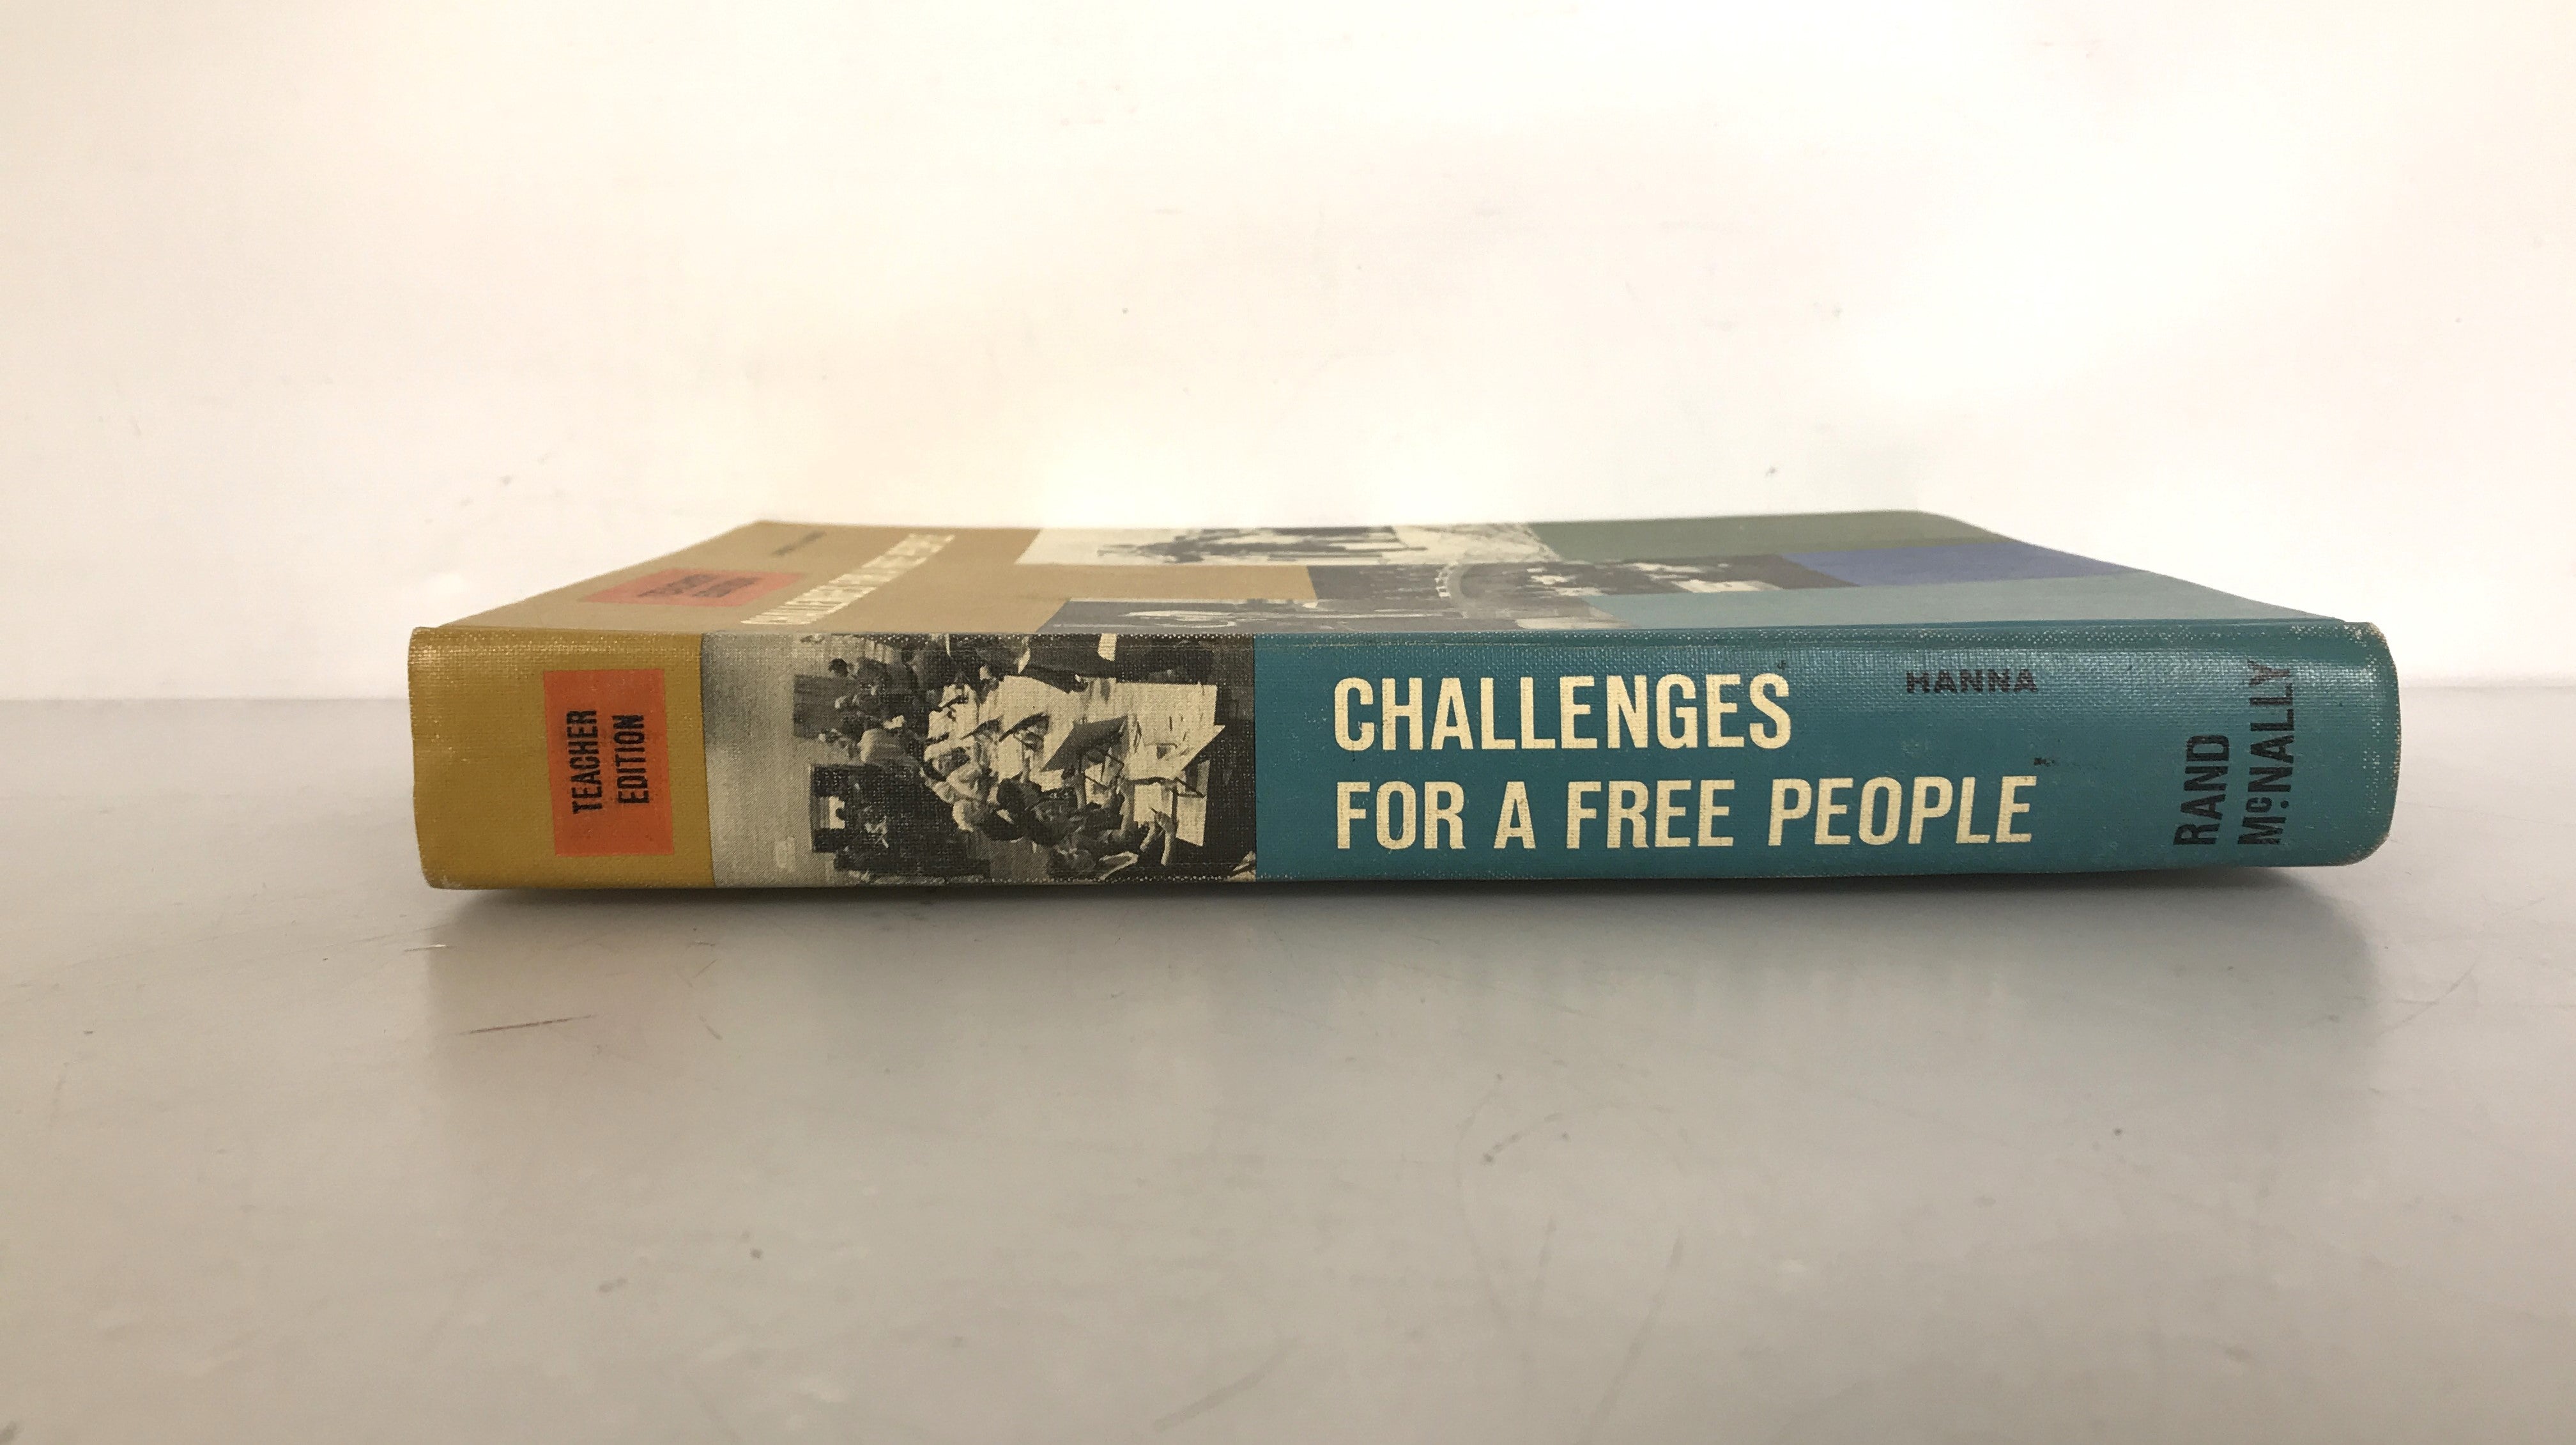 Lot of 3 Social Studies Teacher's Books The Making of Modern America with Key and Challenges for a Free People 1964 HC SC